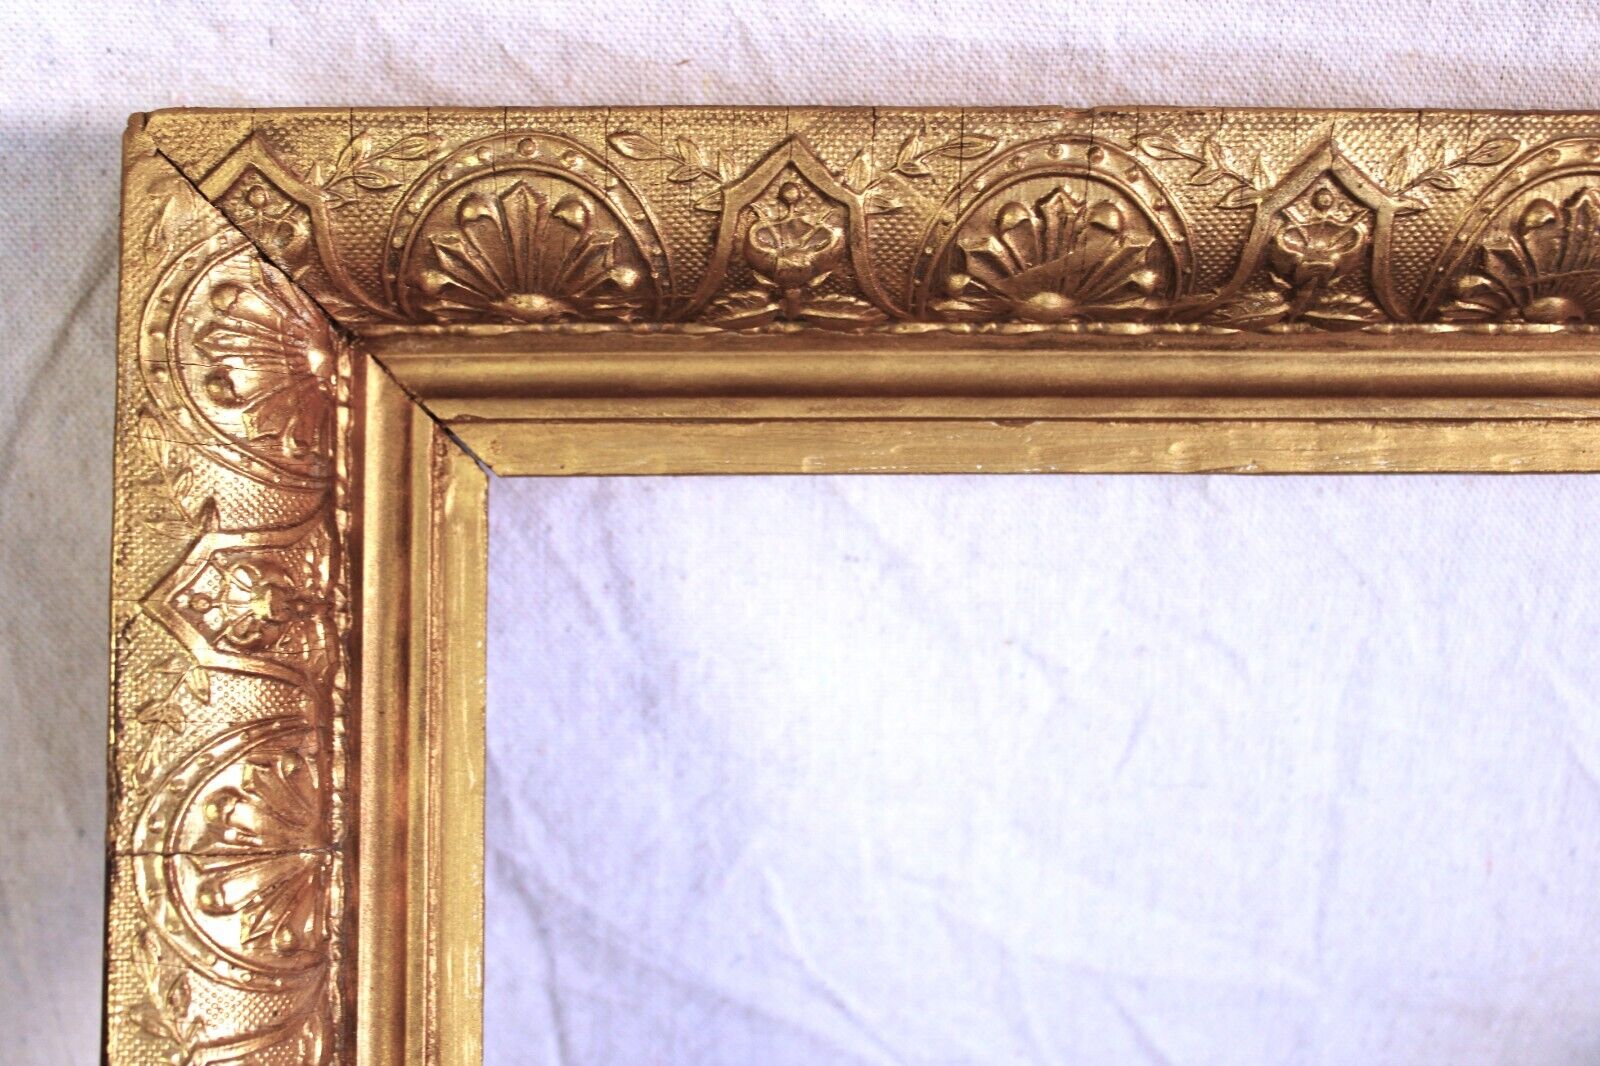 ANTIQUE  FITS 8 X 12 GOLD GILT PICTURE FRAME WOOD AESTHETIC FINE ART VICTORIAN